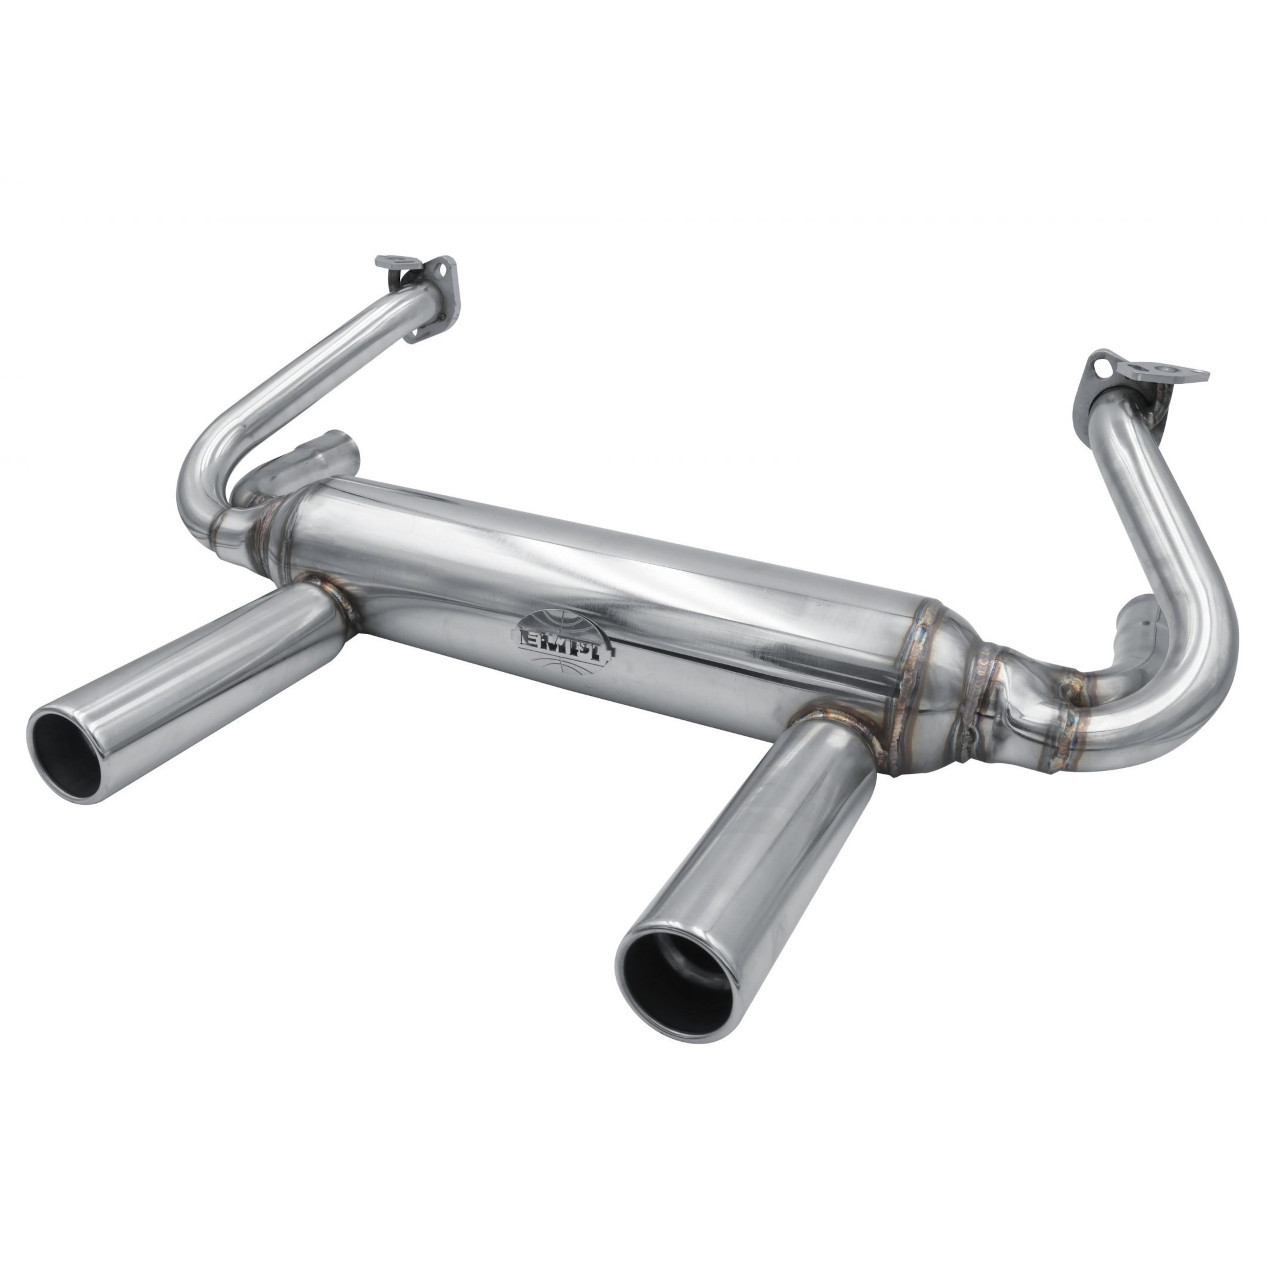 C13-3421 - EMPI - DELUXE STAINLESS STEEL EUROSPORT 2-TIP EXHAUST - GASKETS  HARDWARE AND FLEX HOSE INCLUDED - WILL FIT WITH STOCK HEATER BOXES OR